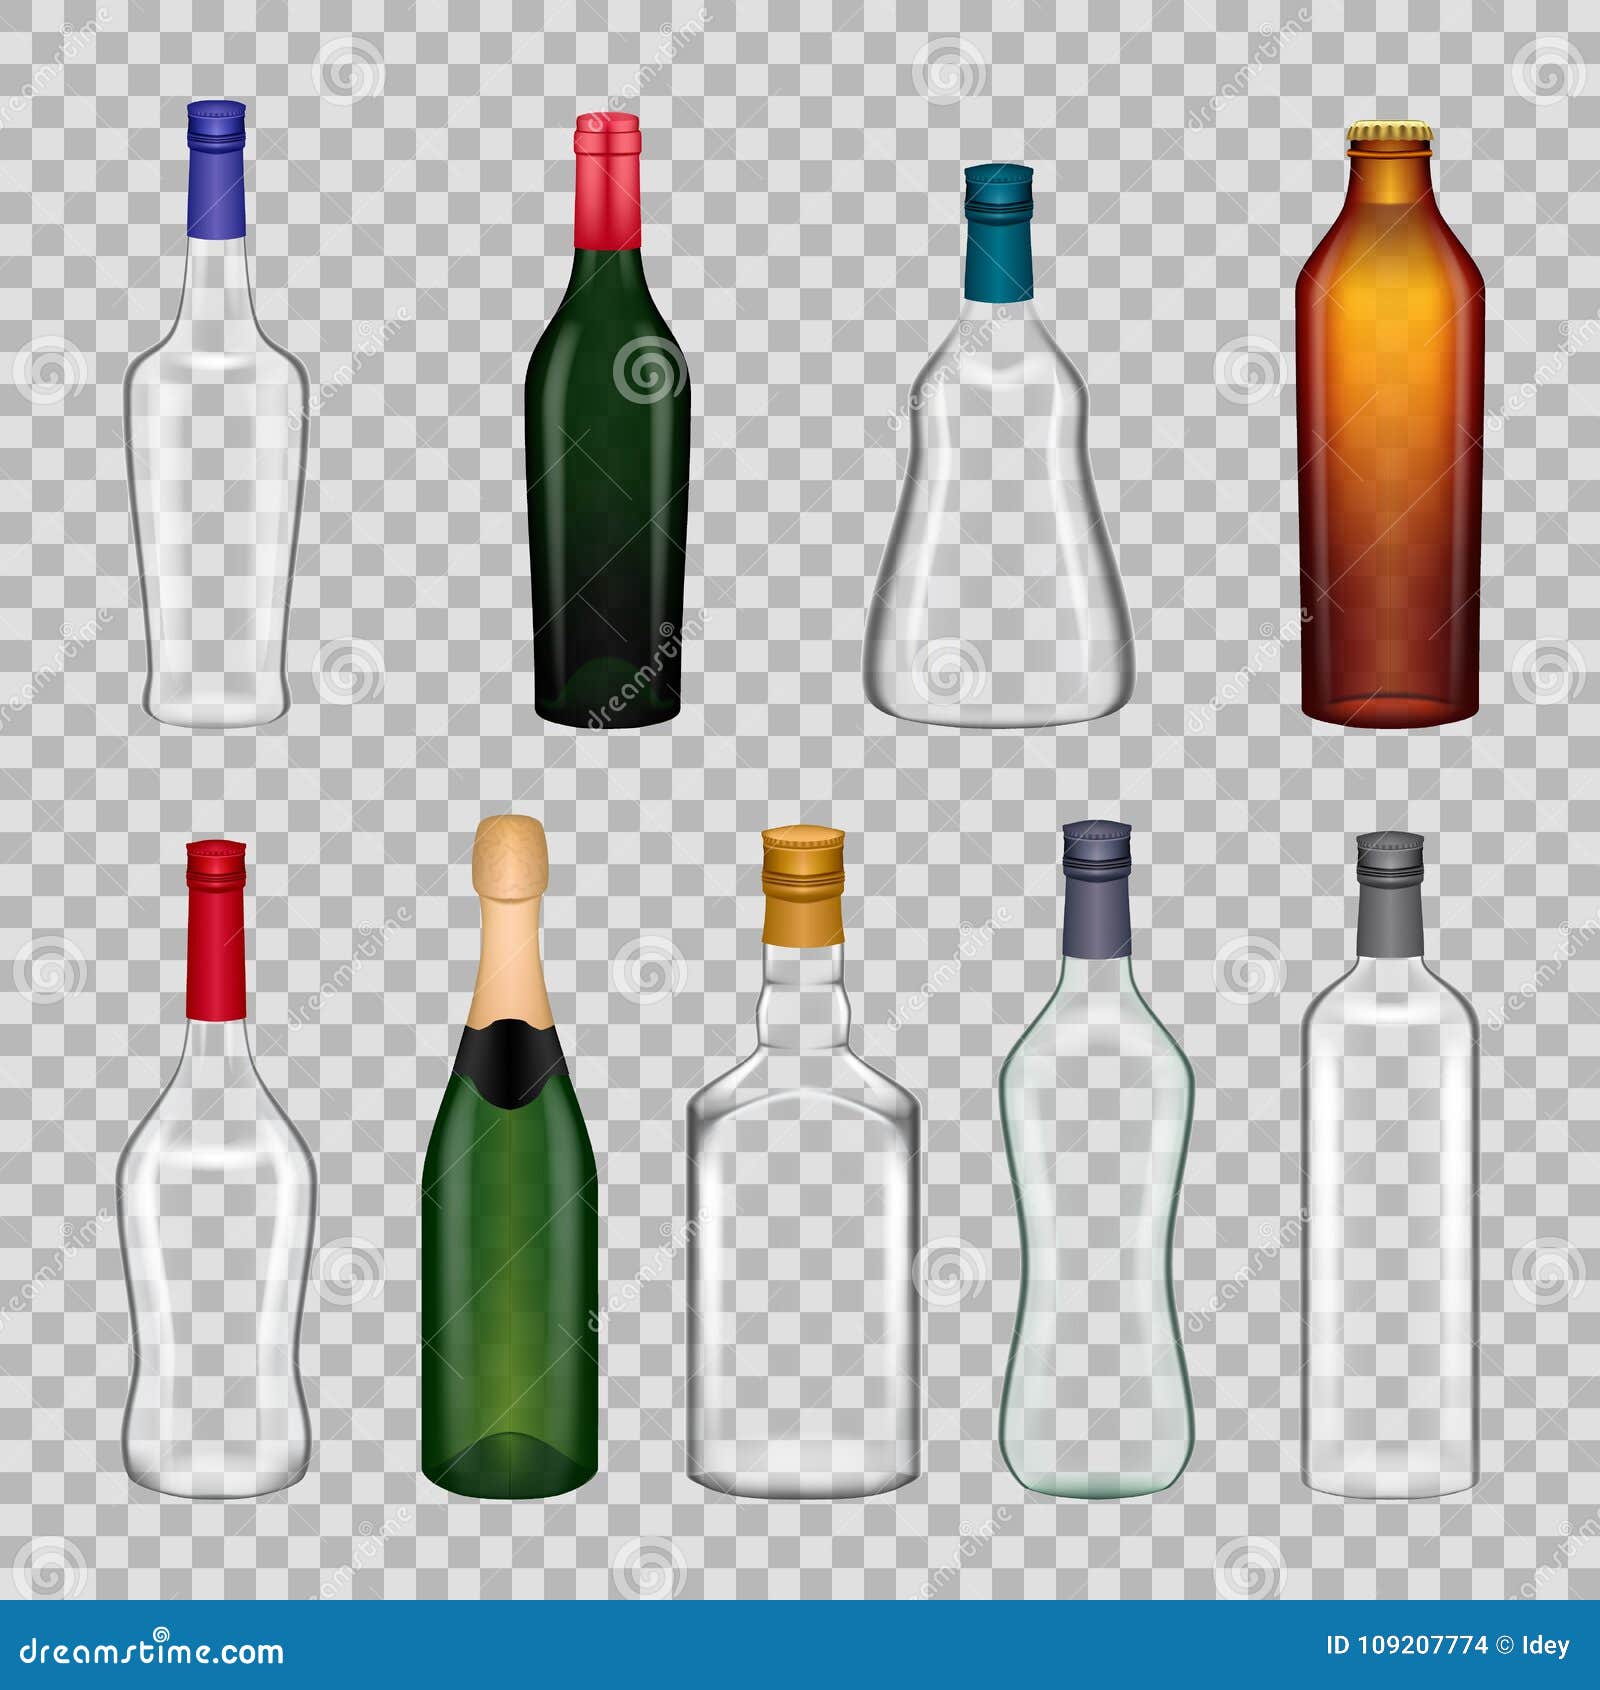 Free Vector  Realistic vodka glass bottle with glass